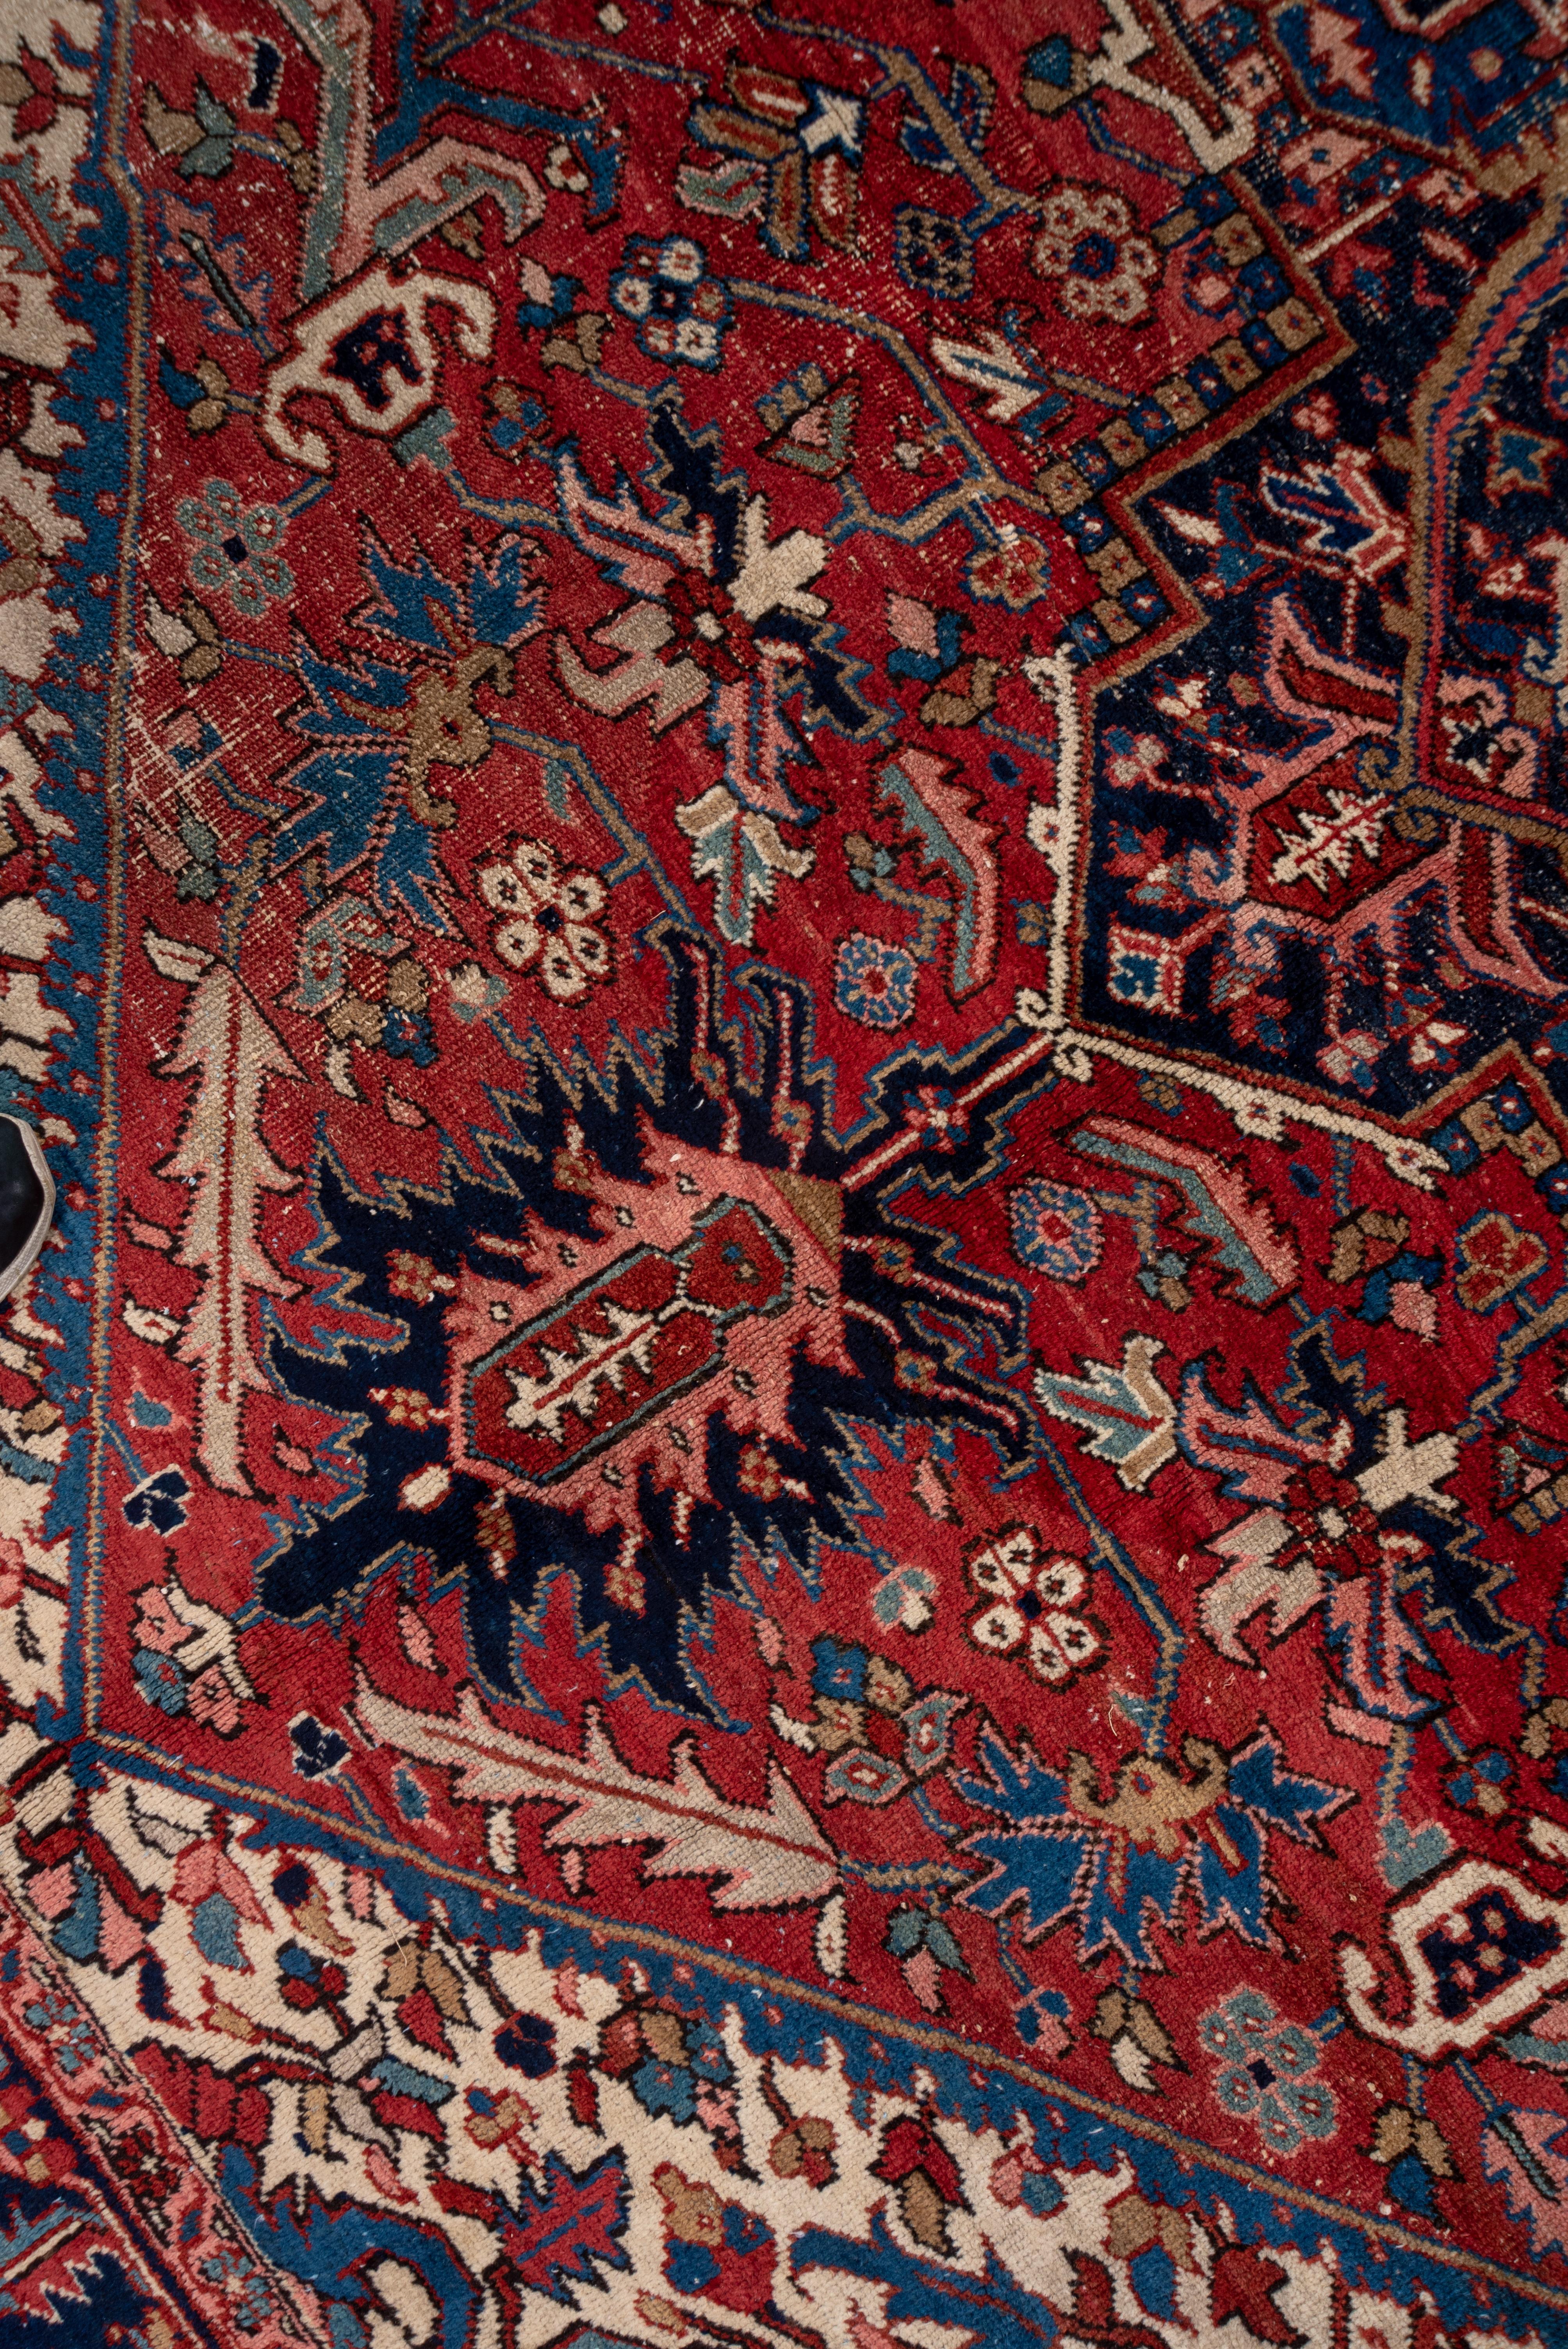 This NW Persian village carpet shows a good natural dye palette including the madder red field, the navy and garnet layered central octogramme medallion, the ivory corners and details in teal, medium blue and pale green. The iconic turtle palmette